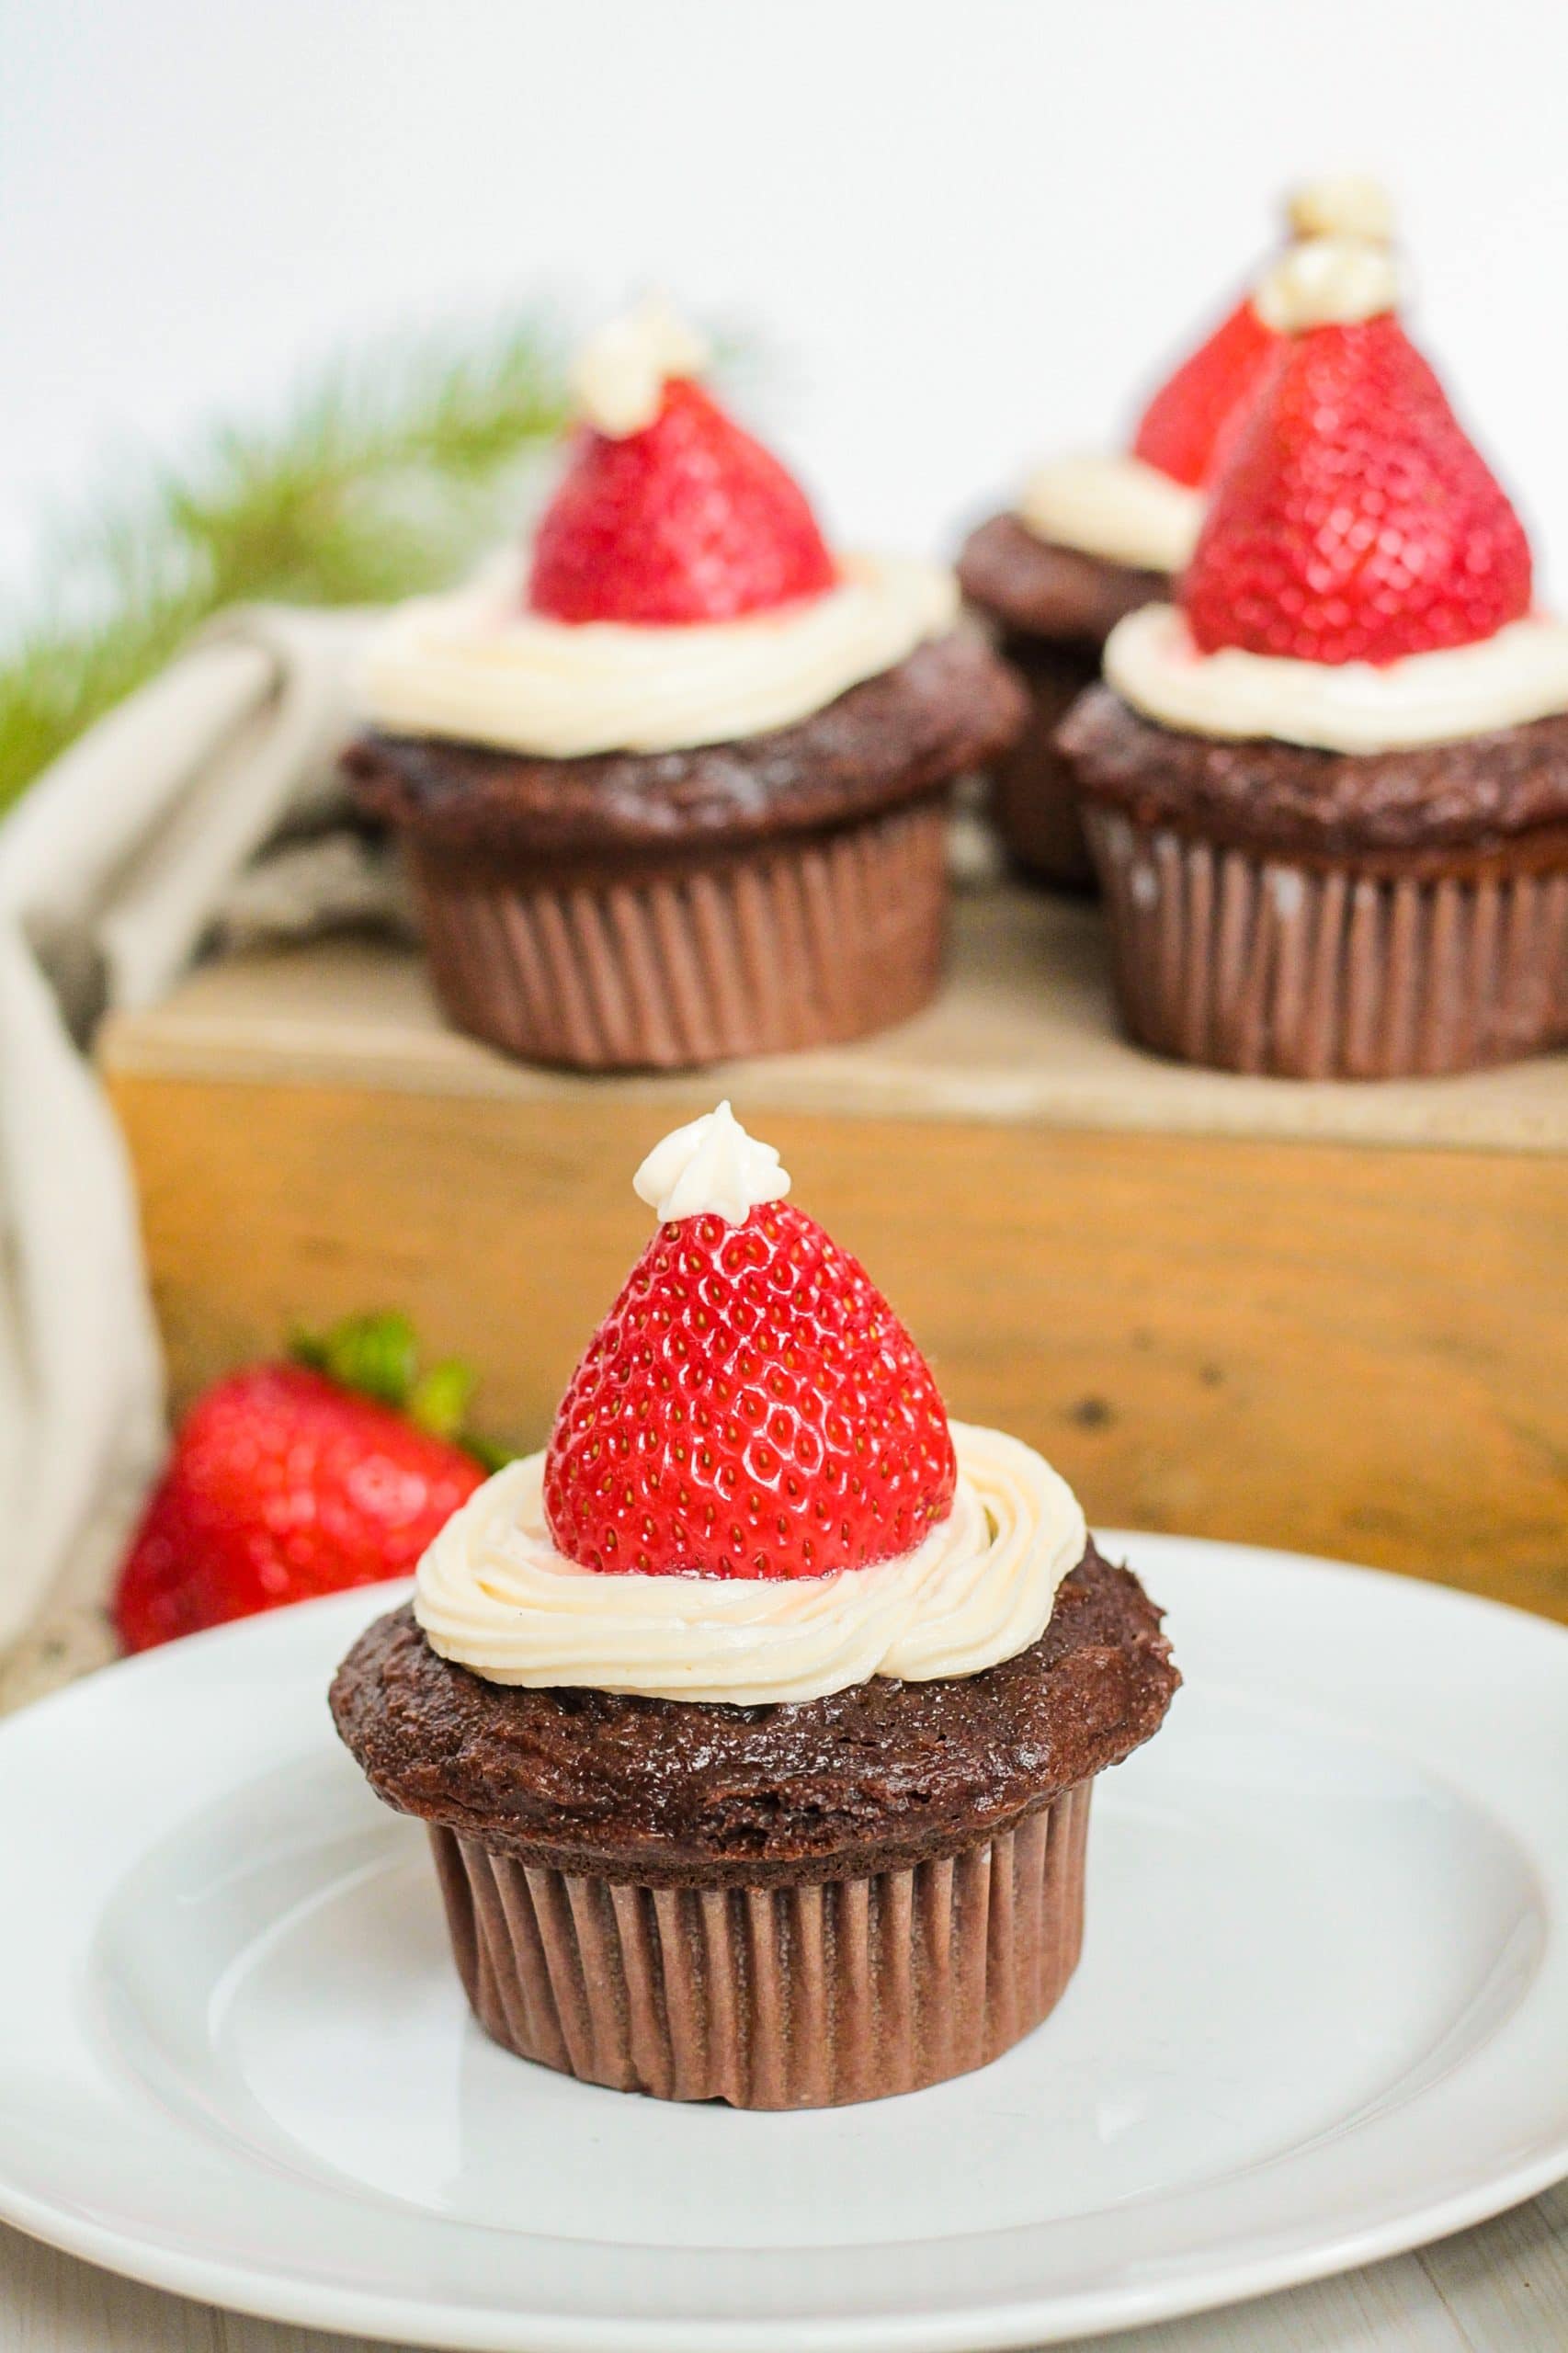 Chocolate cupcakes with strawberries.